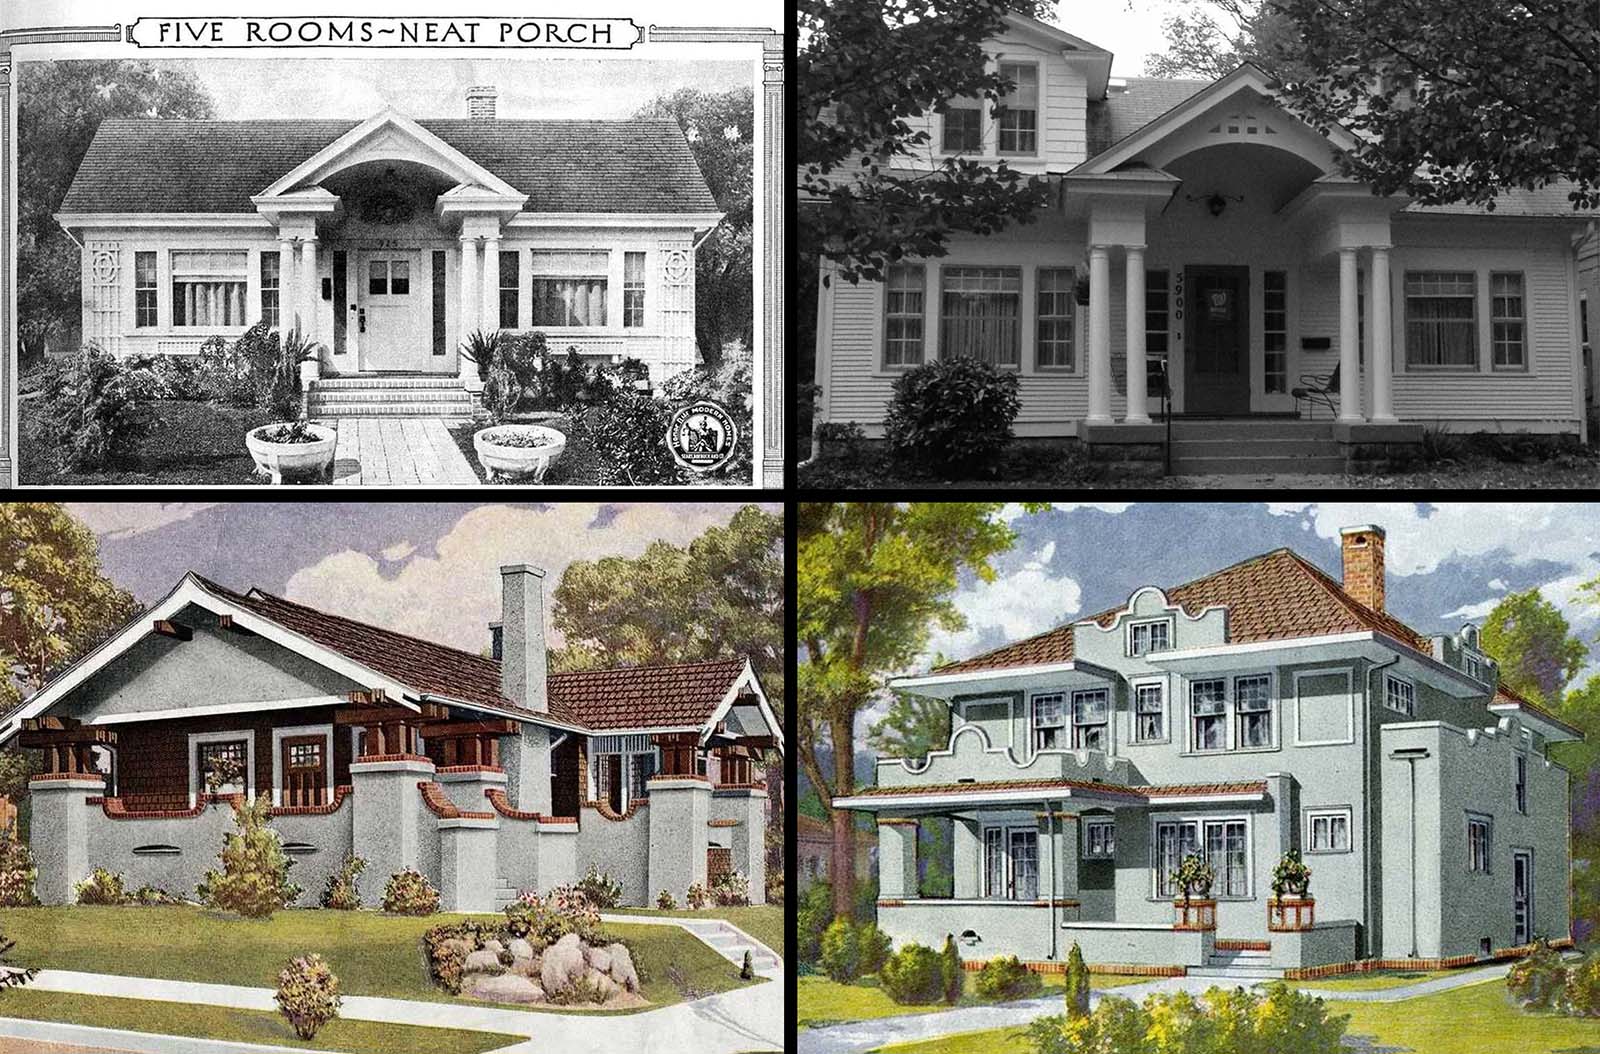 Vintage Mail Order Houses That Came from Sears Catalogs, 1910s-1940s